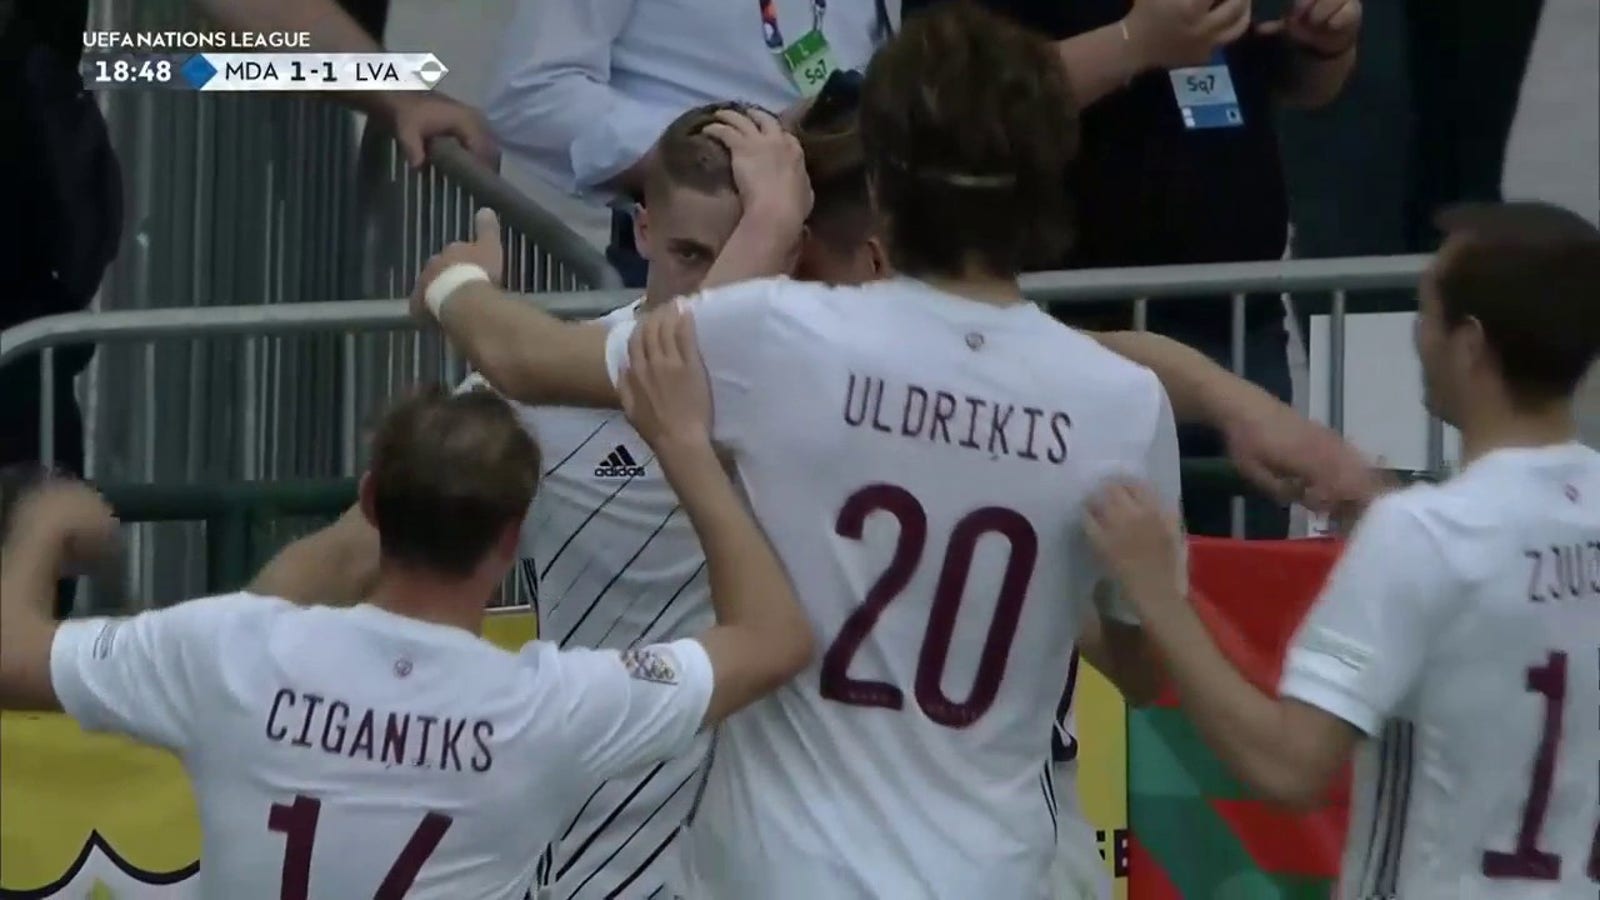 A mistake from Moldova leads to the equalizer by Latvia